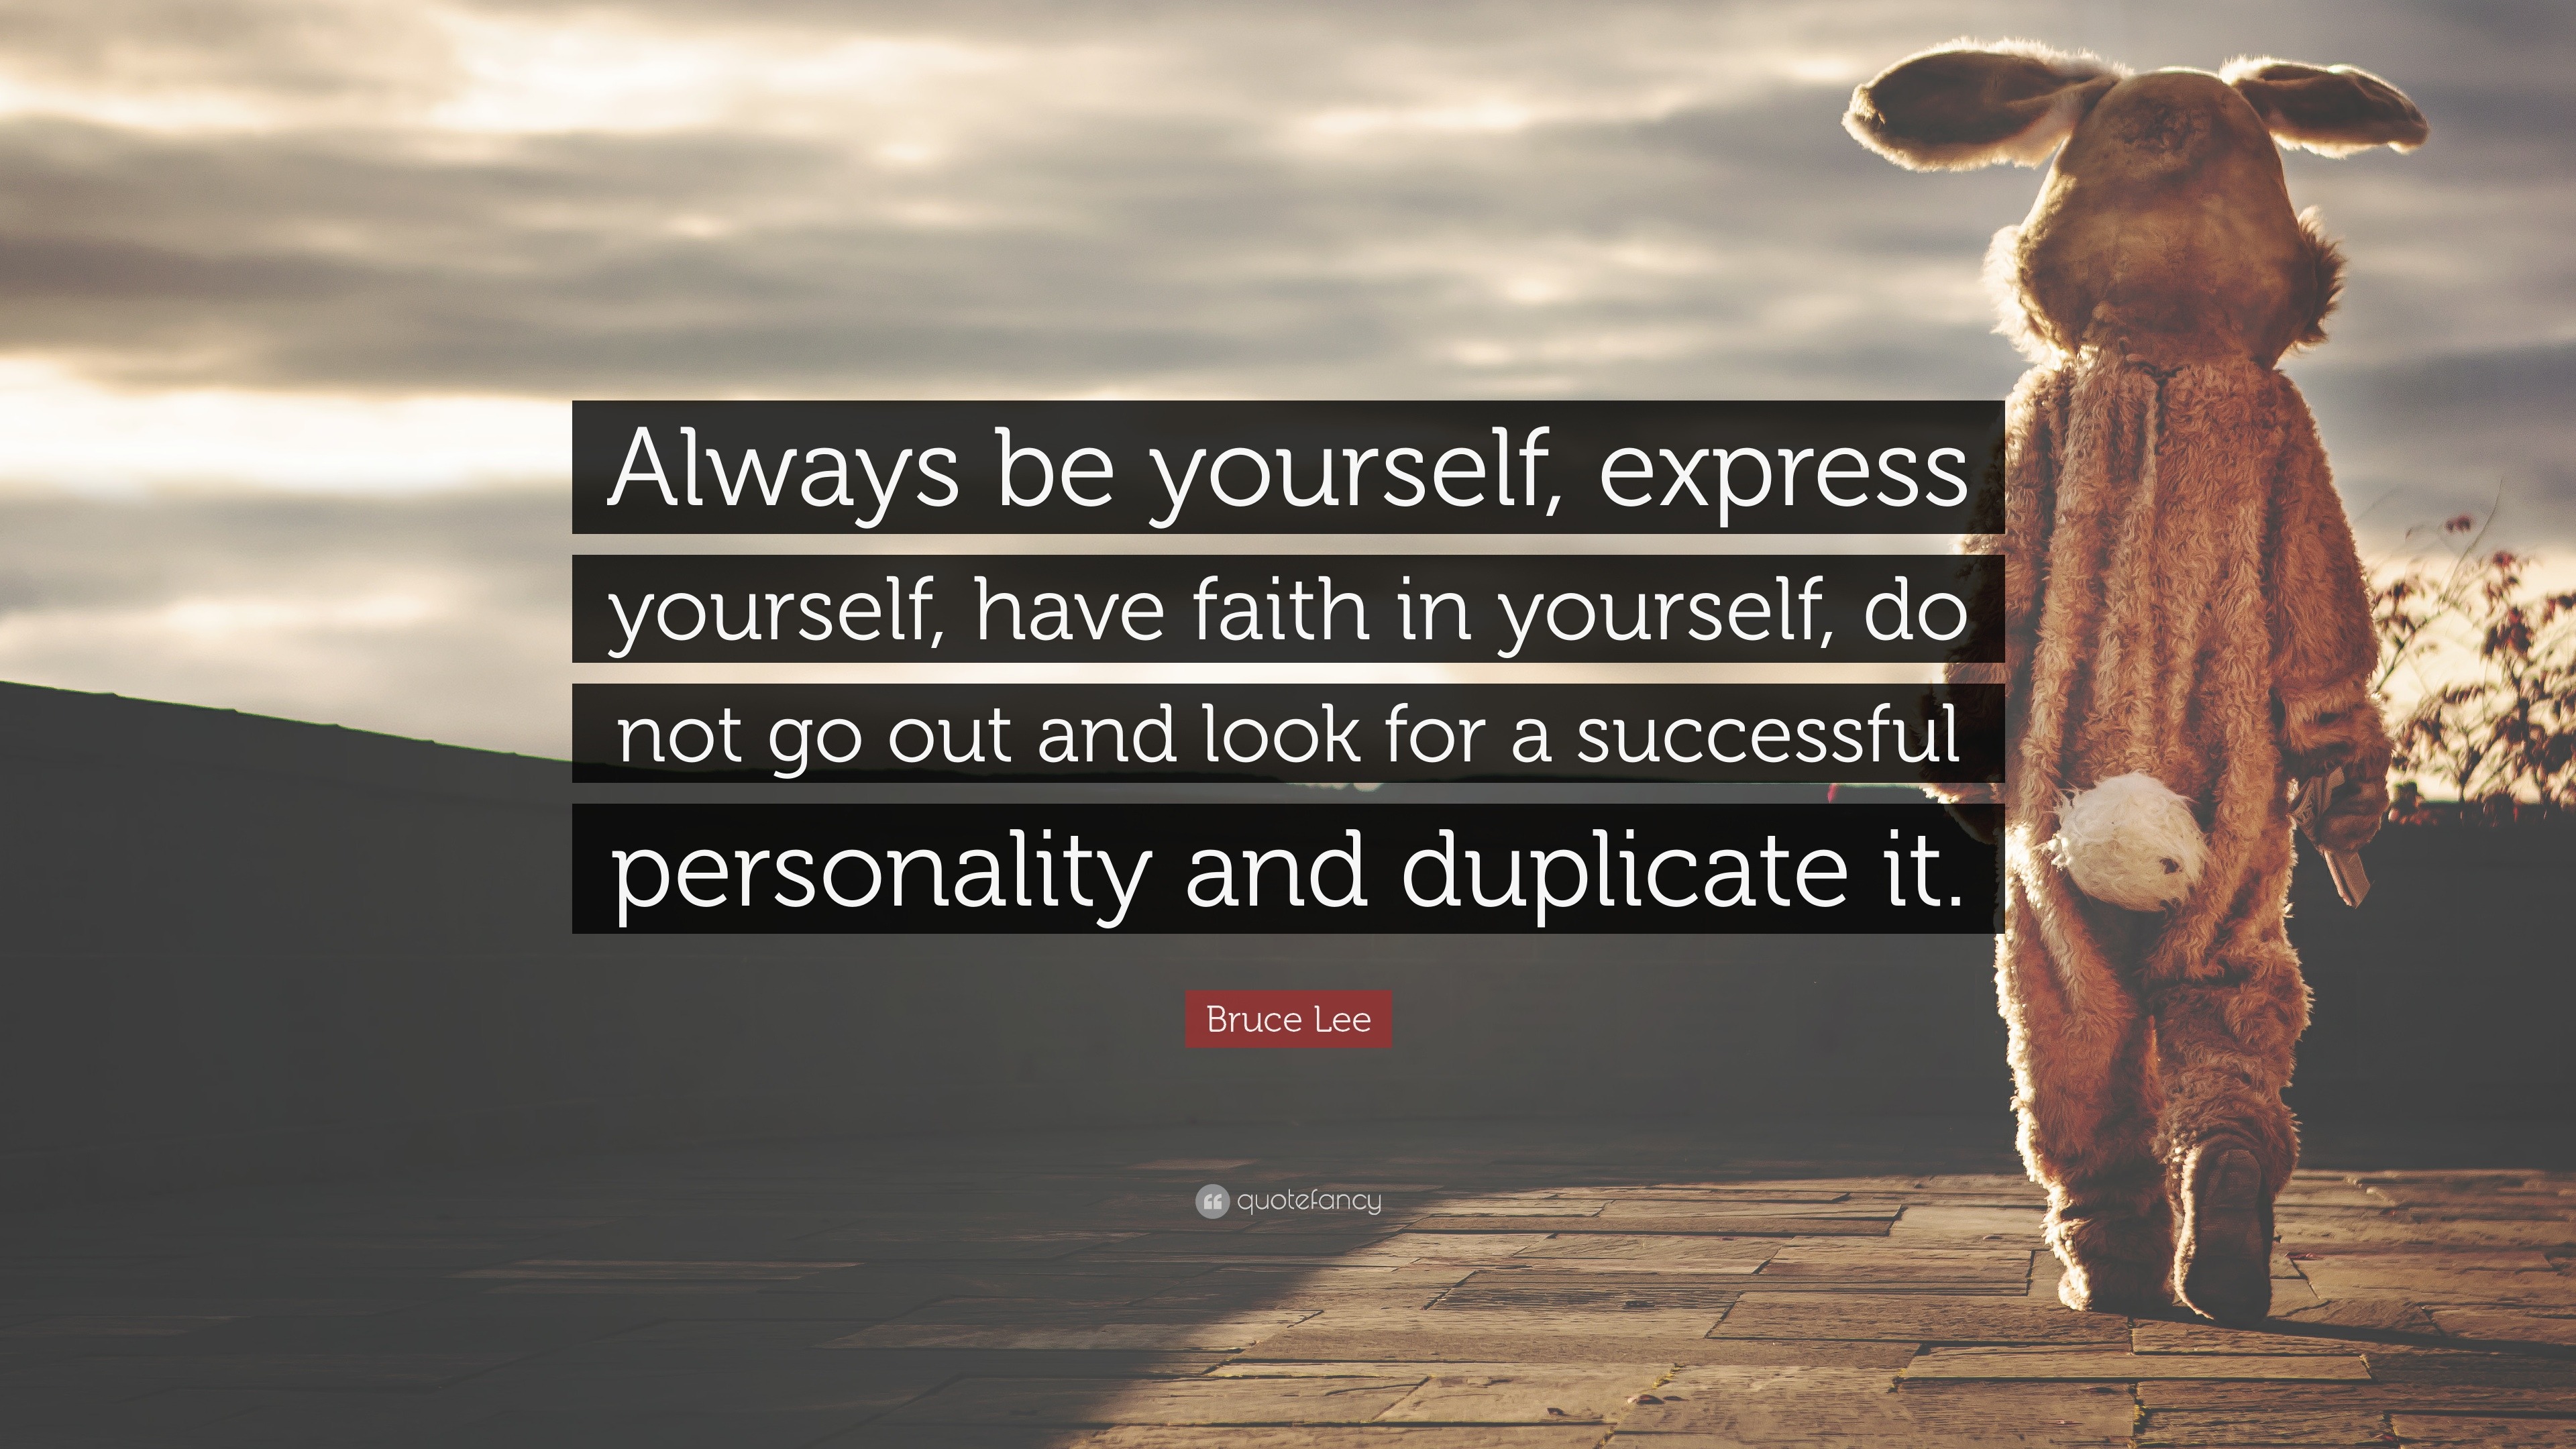 Bruce Lee Quote: “Always be yourself, express yourself, have faith in